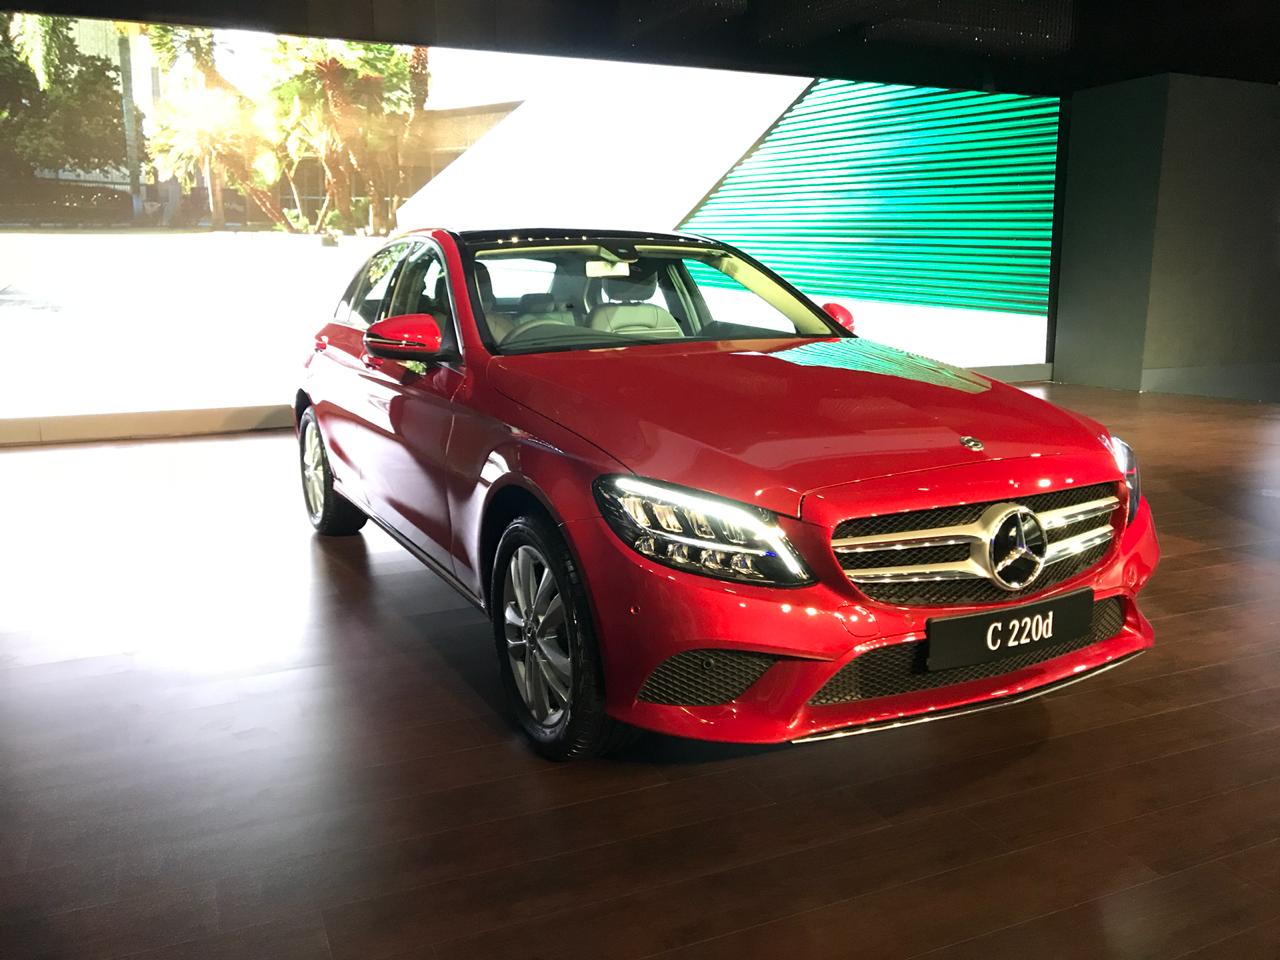 <p><a href="http://overdrive.in/news/2018-mercedes-benz-c-class-launched-at-rs-40-lakh/">Read our launch story for the new C-Class here</a></p>